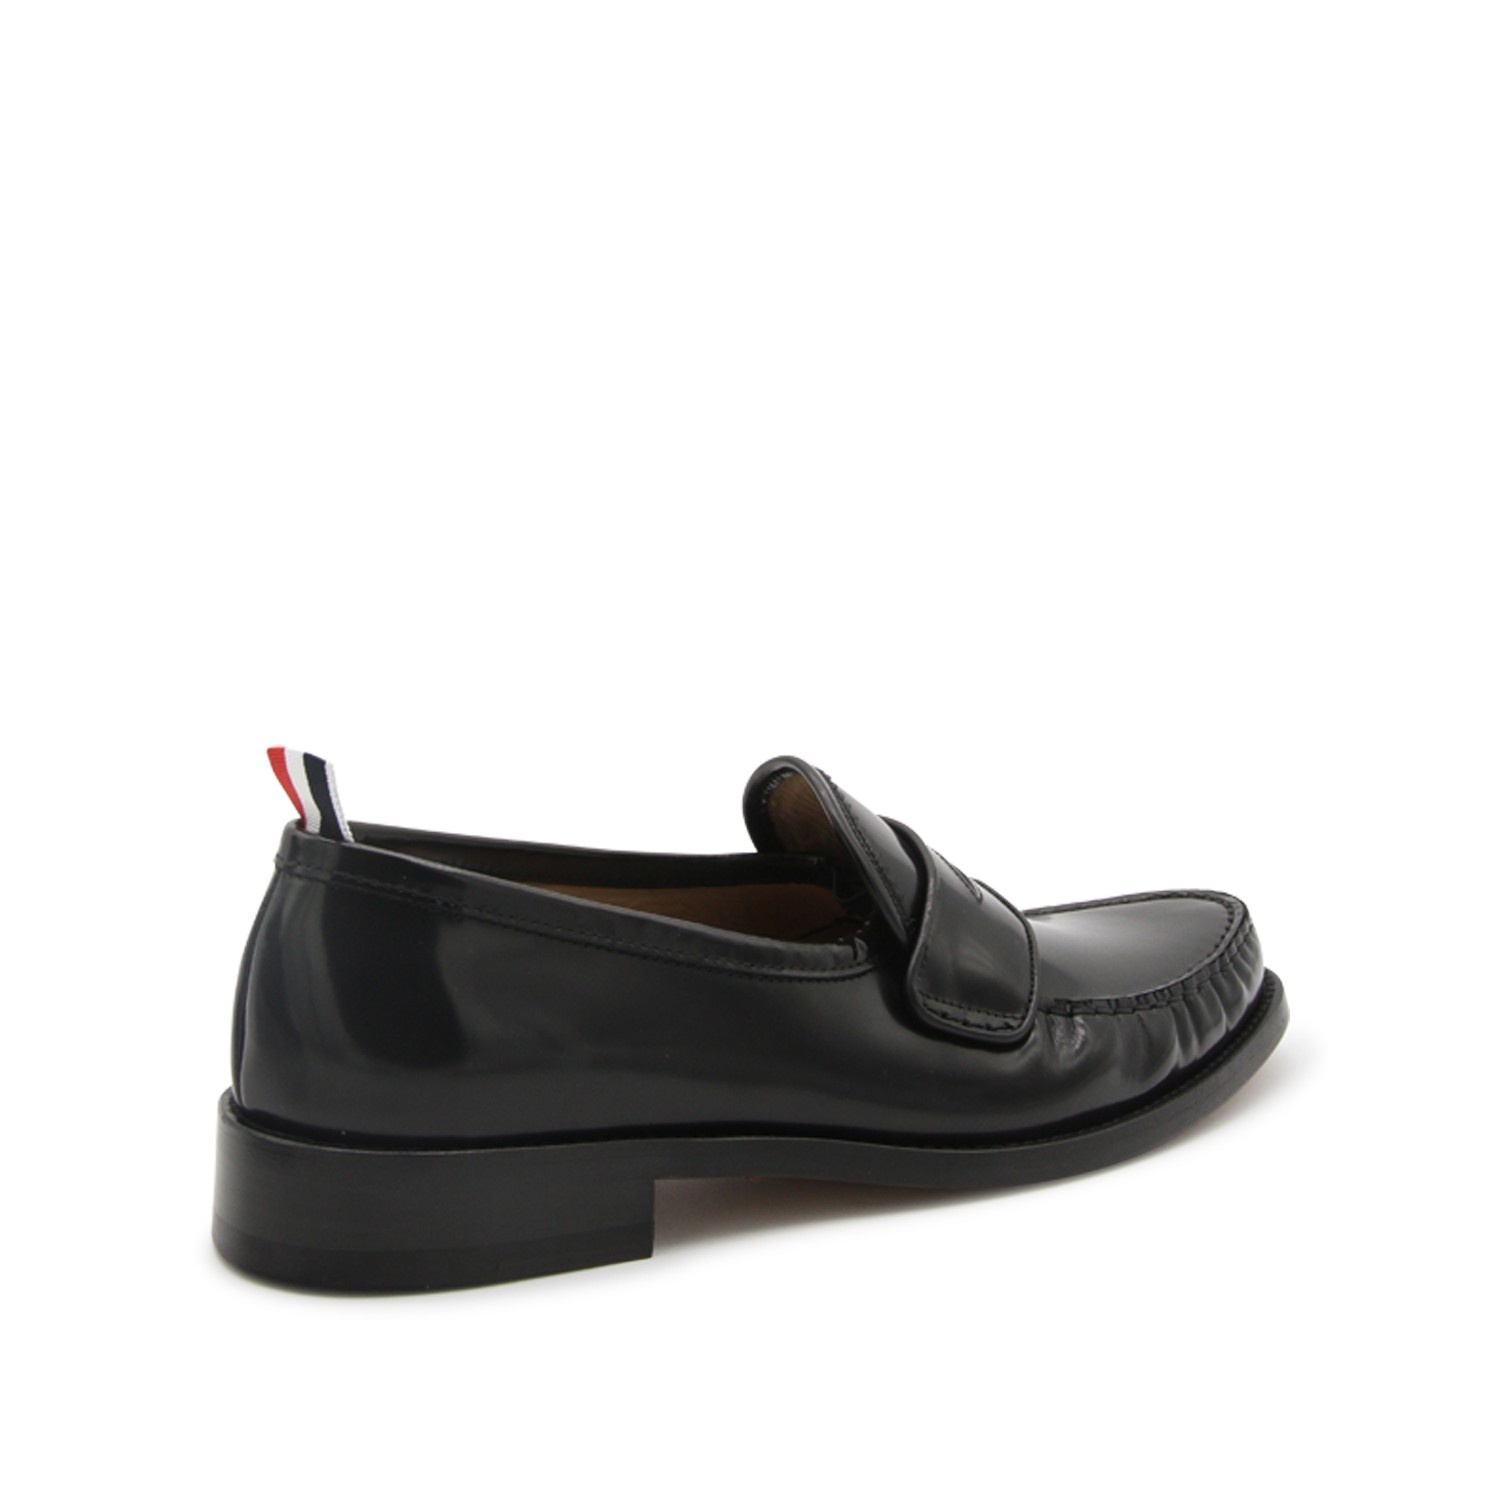 BLACK LEATHER LOAFERS - 3